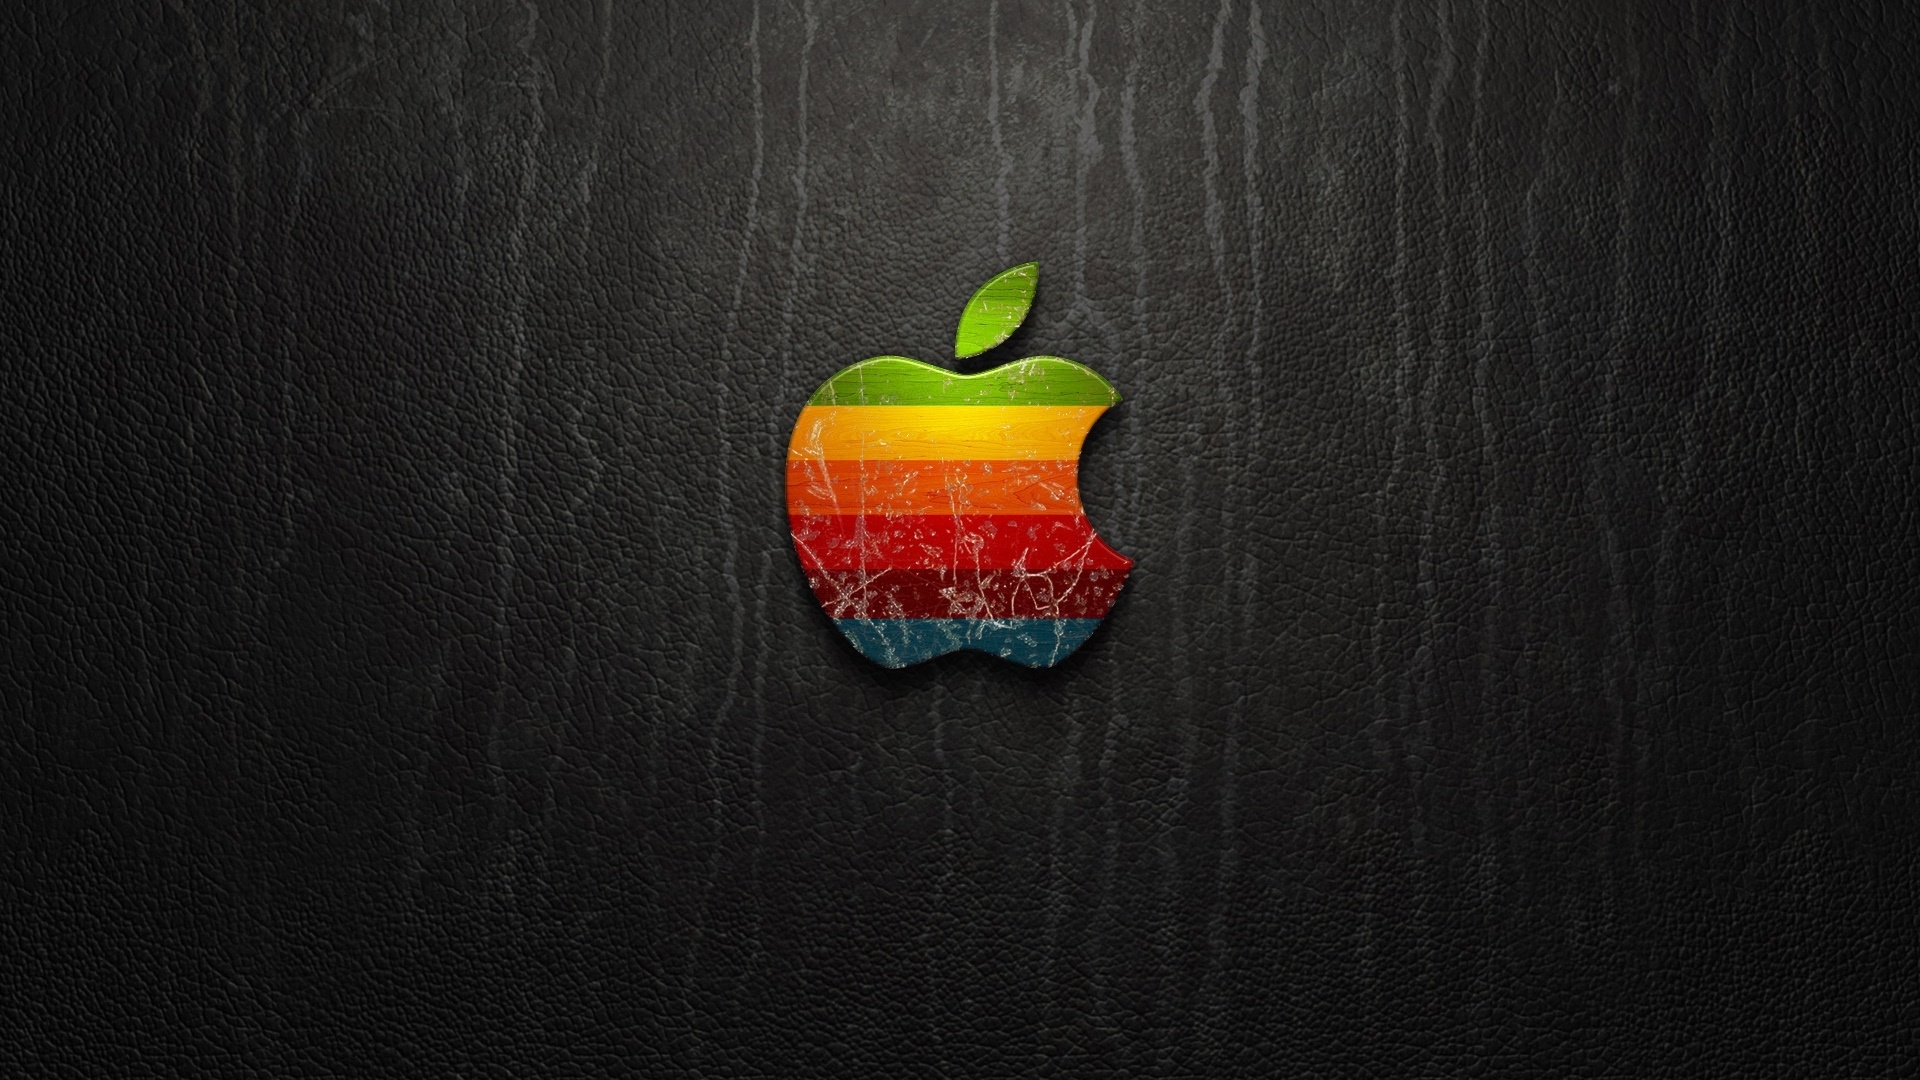 Apple Leather for 1920 x 1080 HDTV 1080p resolution